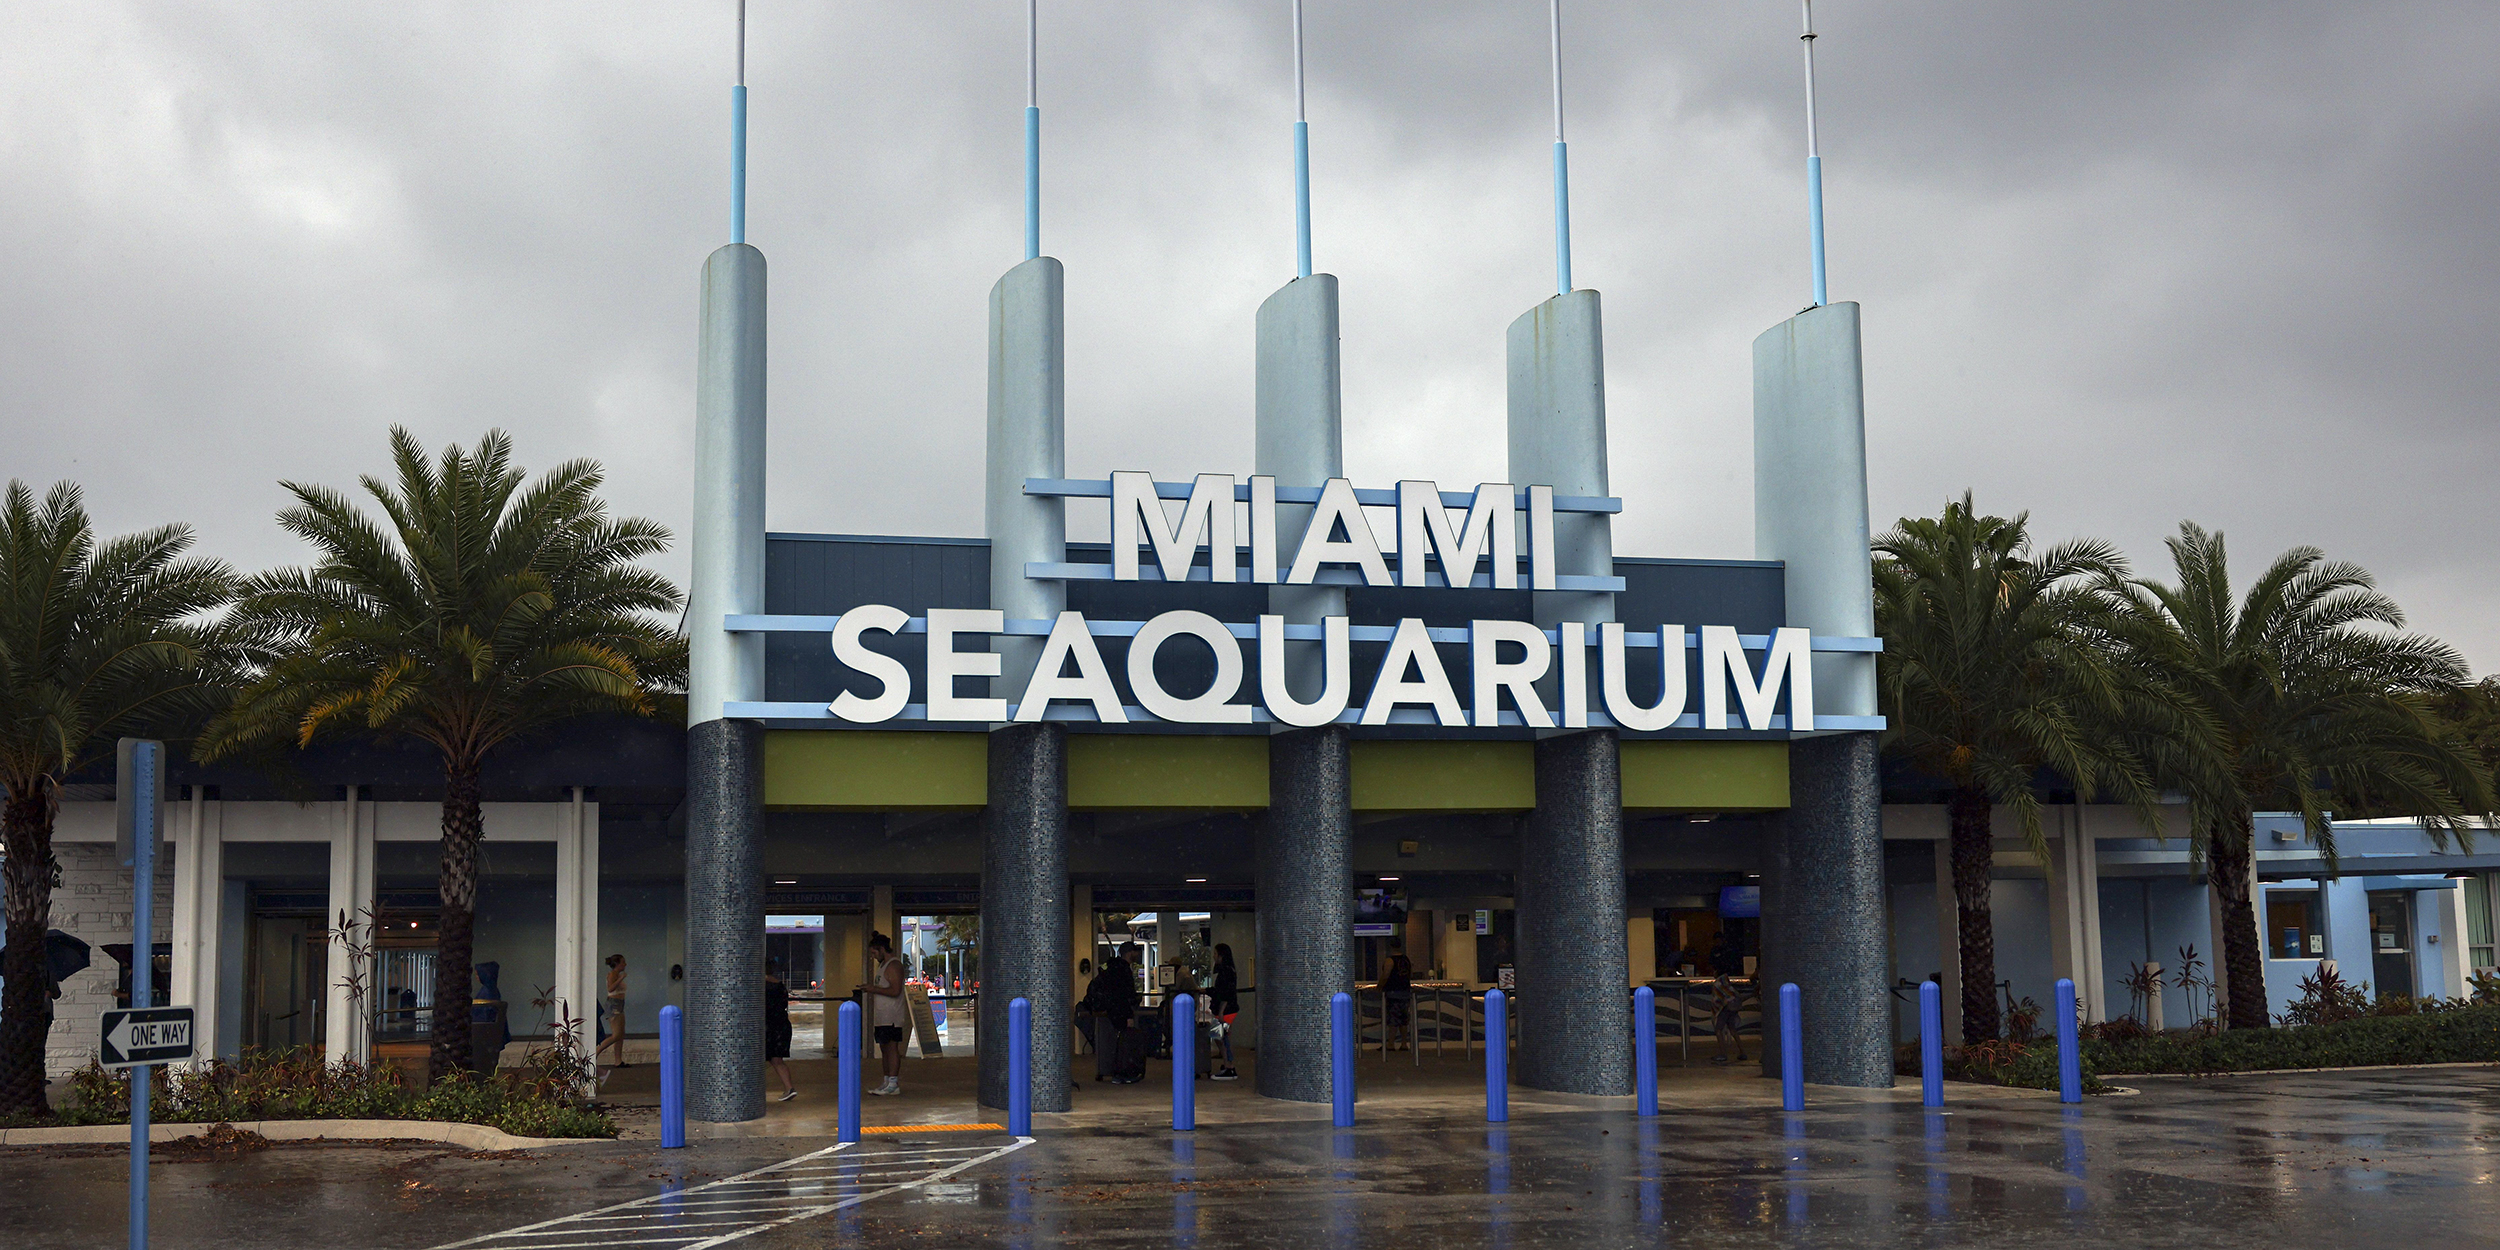 The entrance to Miami Seaquarium is seen, Thursday, March 30, 2023, in Miami. An unlikely coalition of a theme park owner, animal rights group and NFL owner-philanthropist announced Thursday that a plan is in place to return Lolita, an orca that has lived at the Miami Seaquarium for more than 50 years, to her home waters in the Pacific Northwest. (Alie Skowronski/Miami Herald via AP)